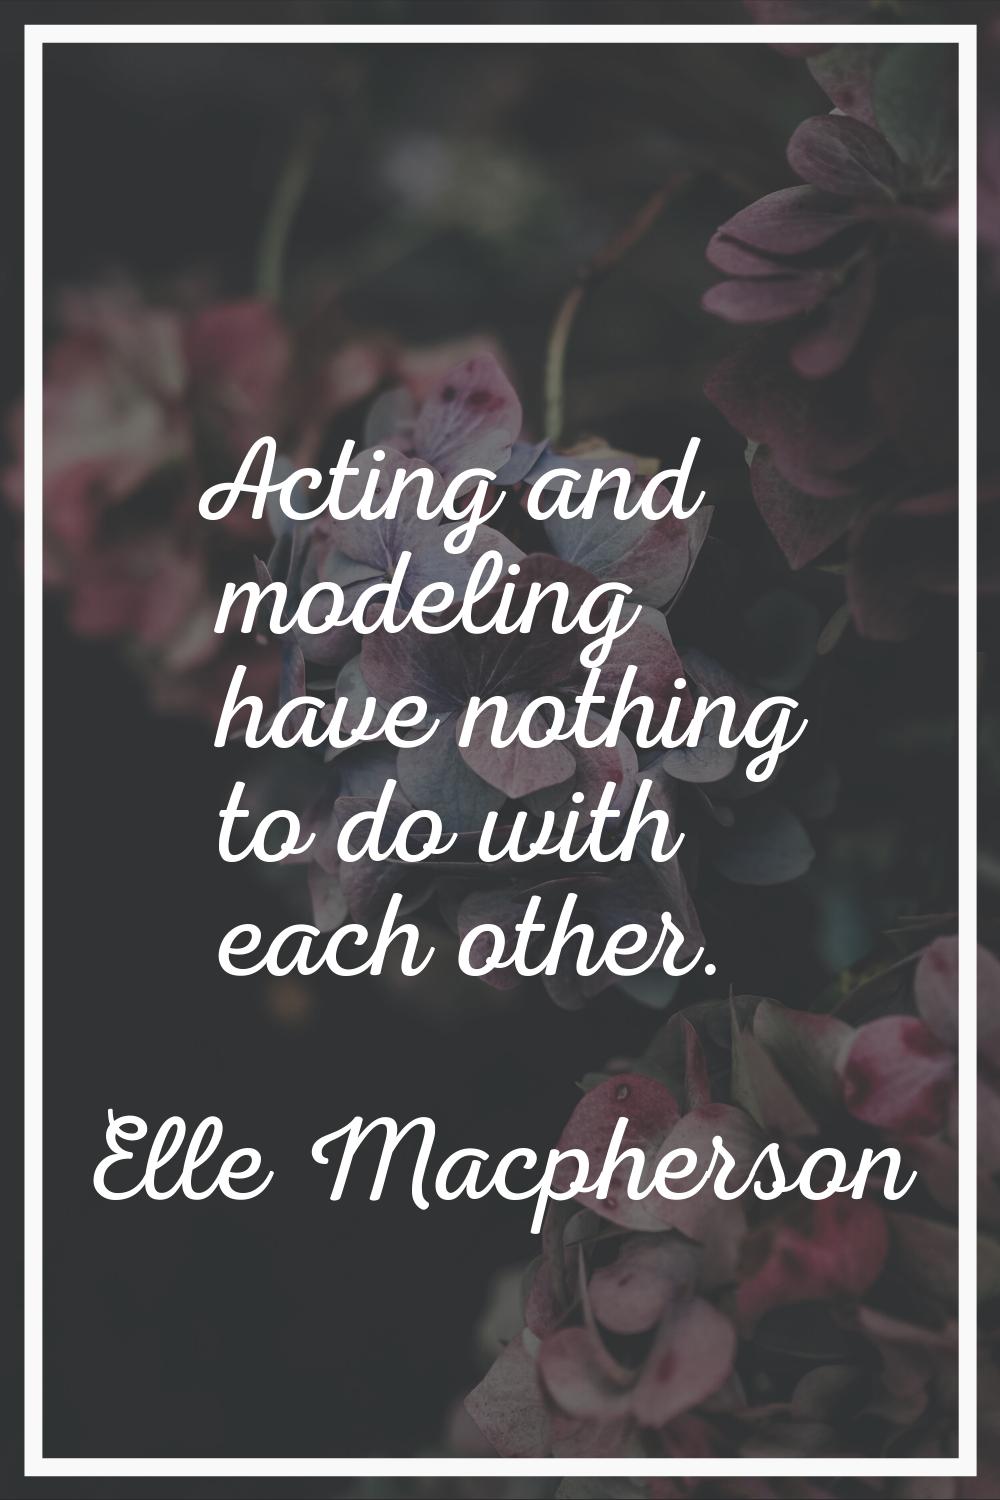 Acting and modeling have nothing to do with each other.